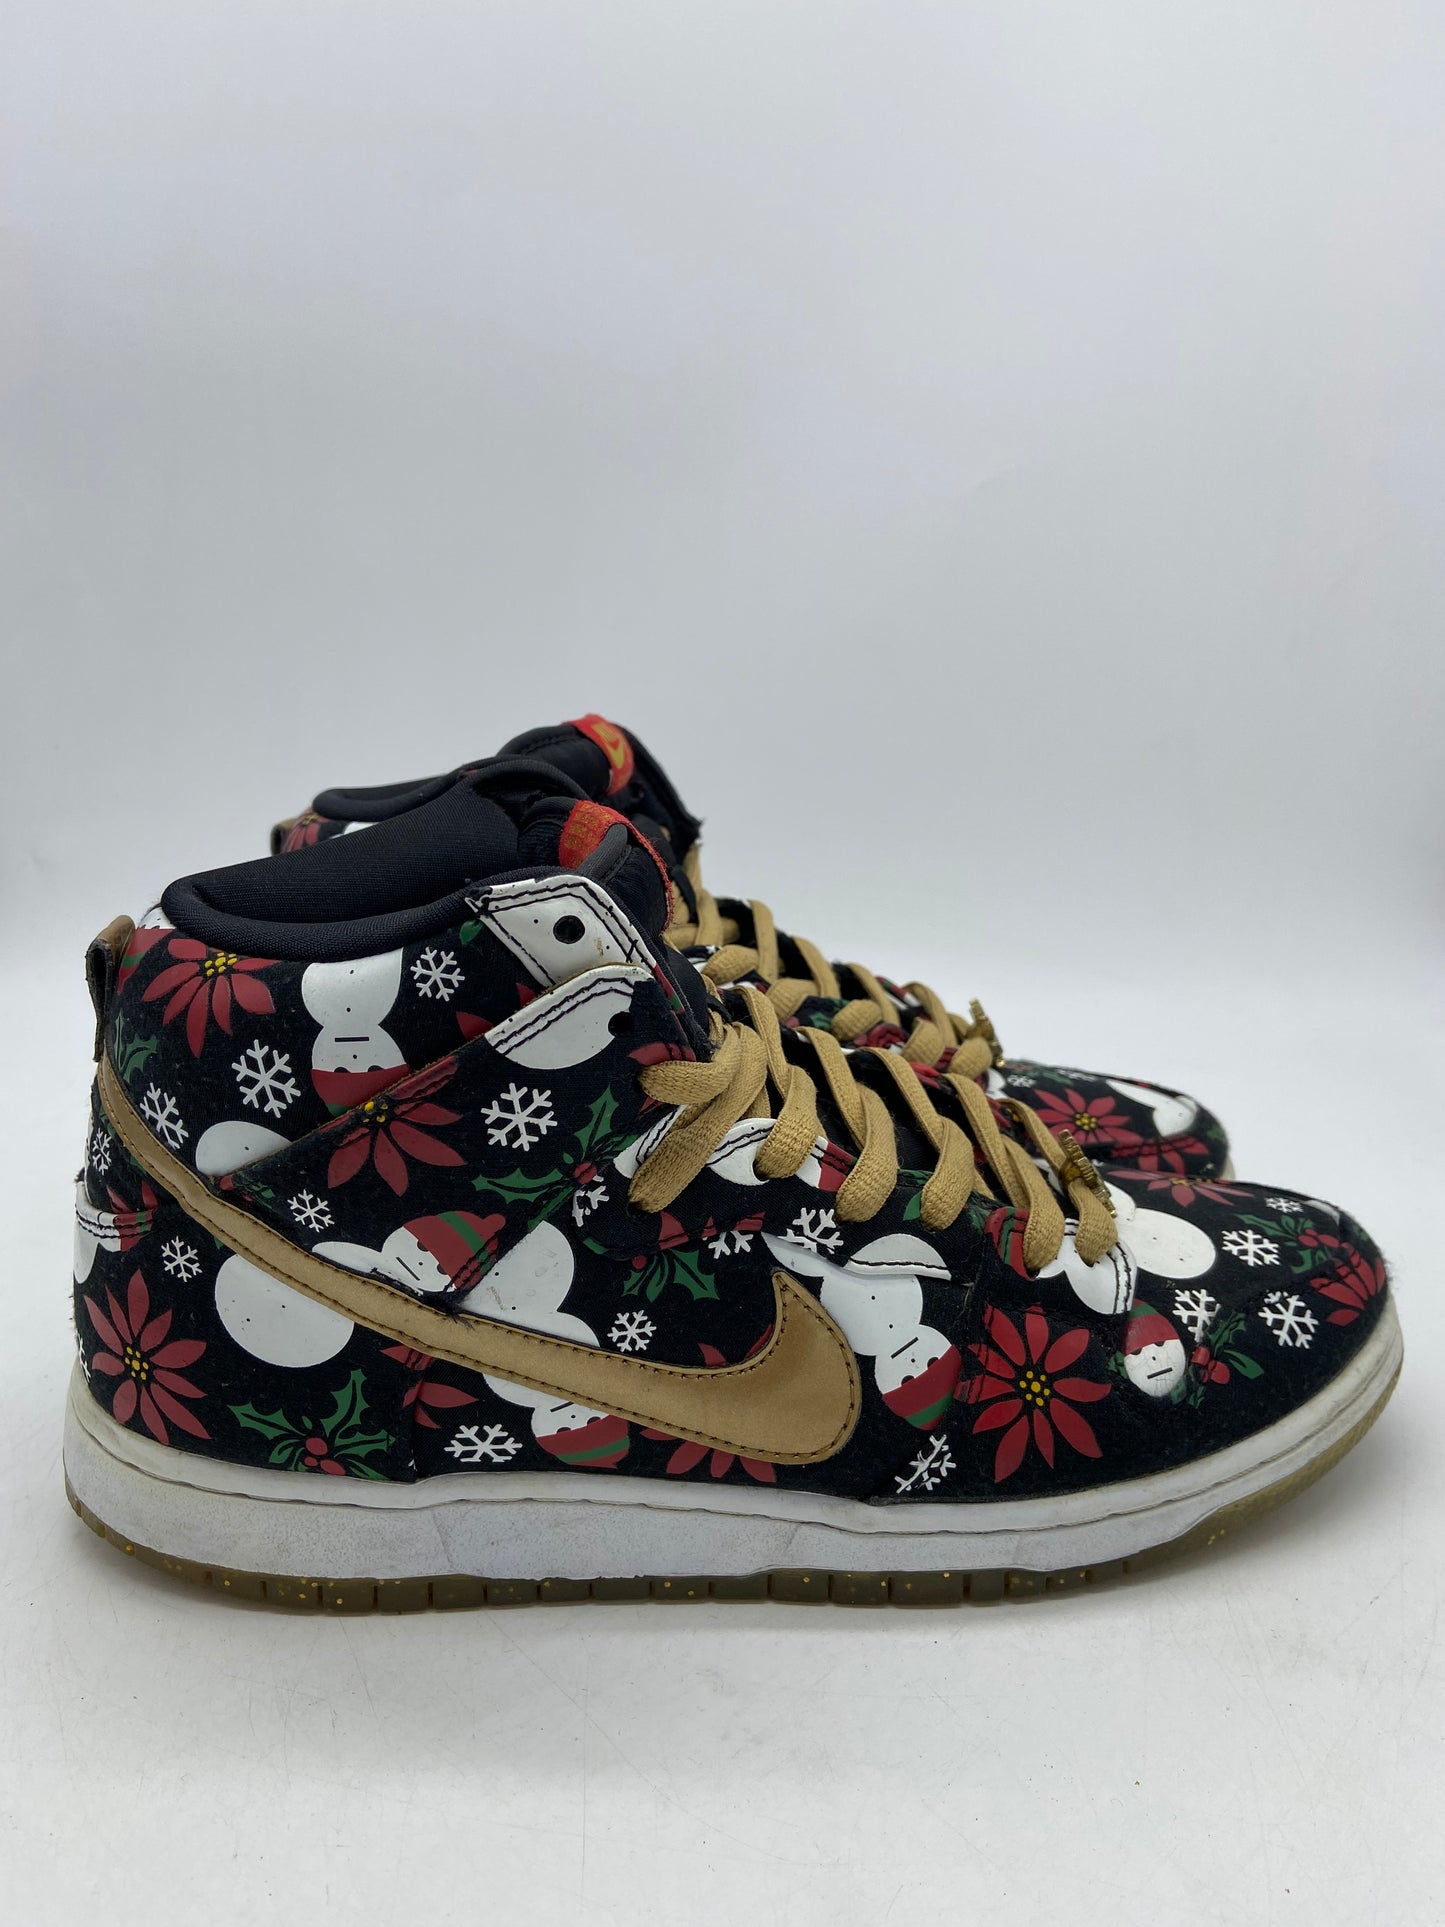 Preowned Nike SB Dunk High Premium x Concepts Ugly Christmas Sweater Sz 9M/10.5W